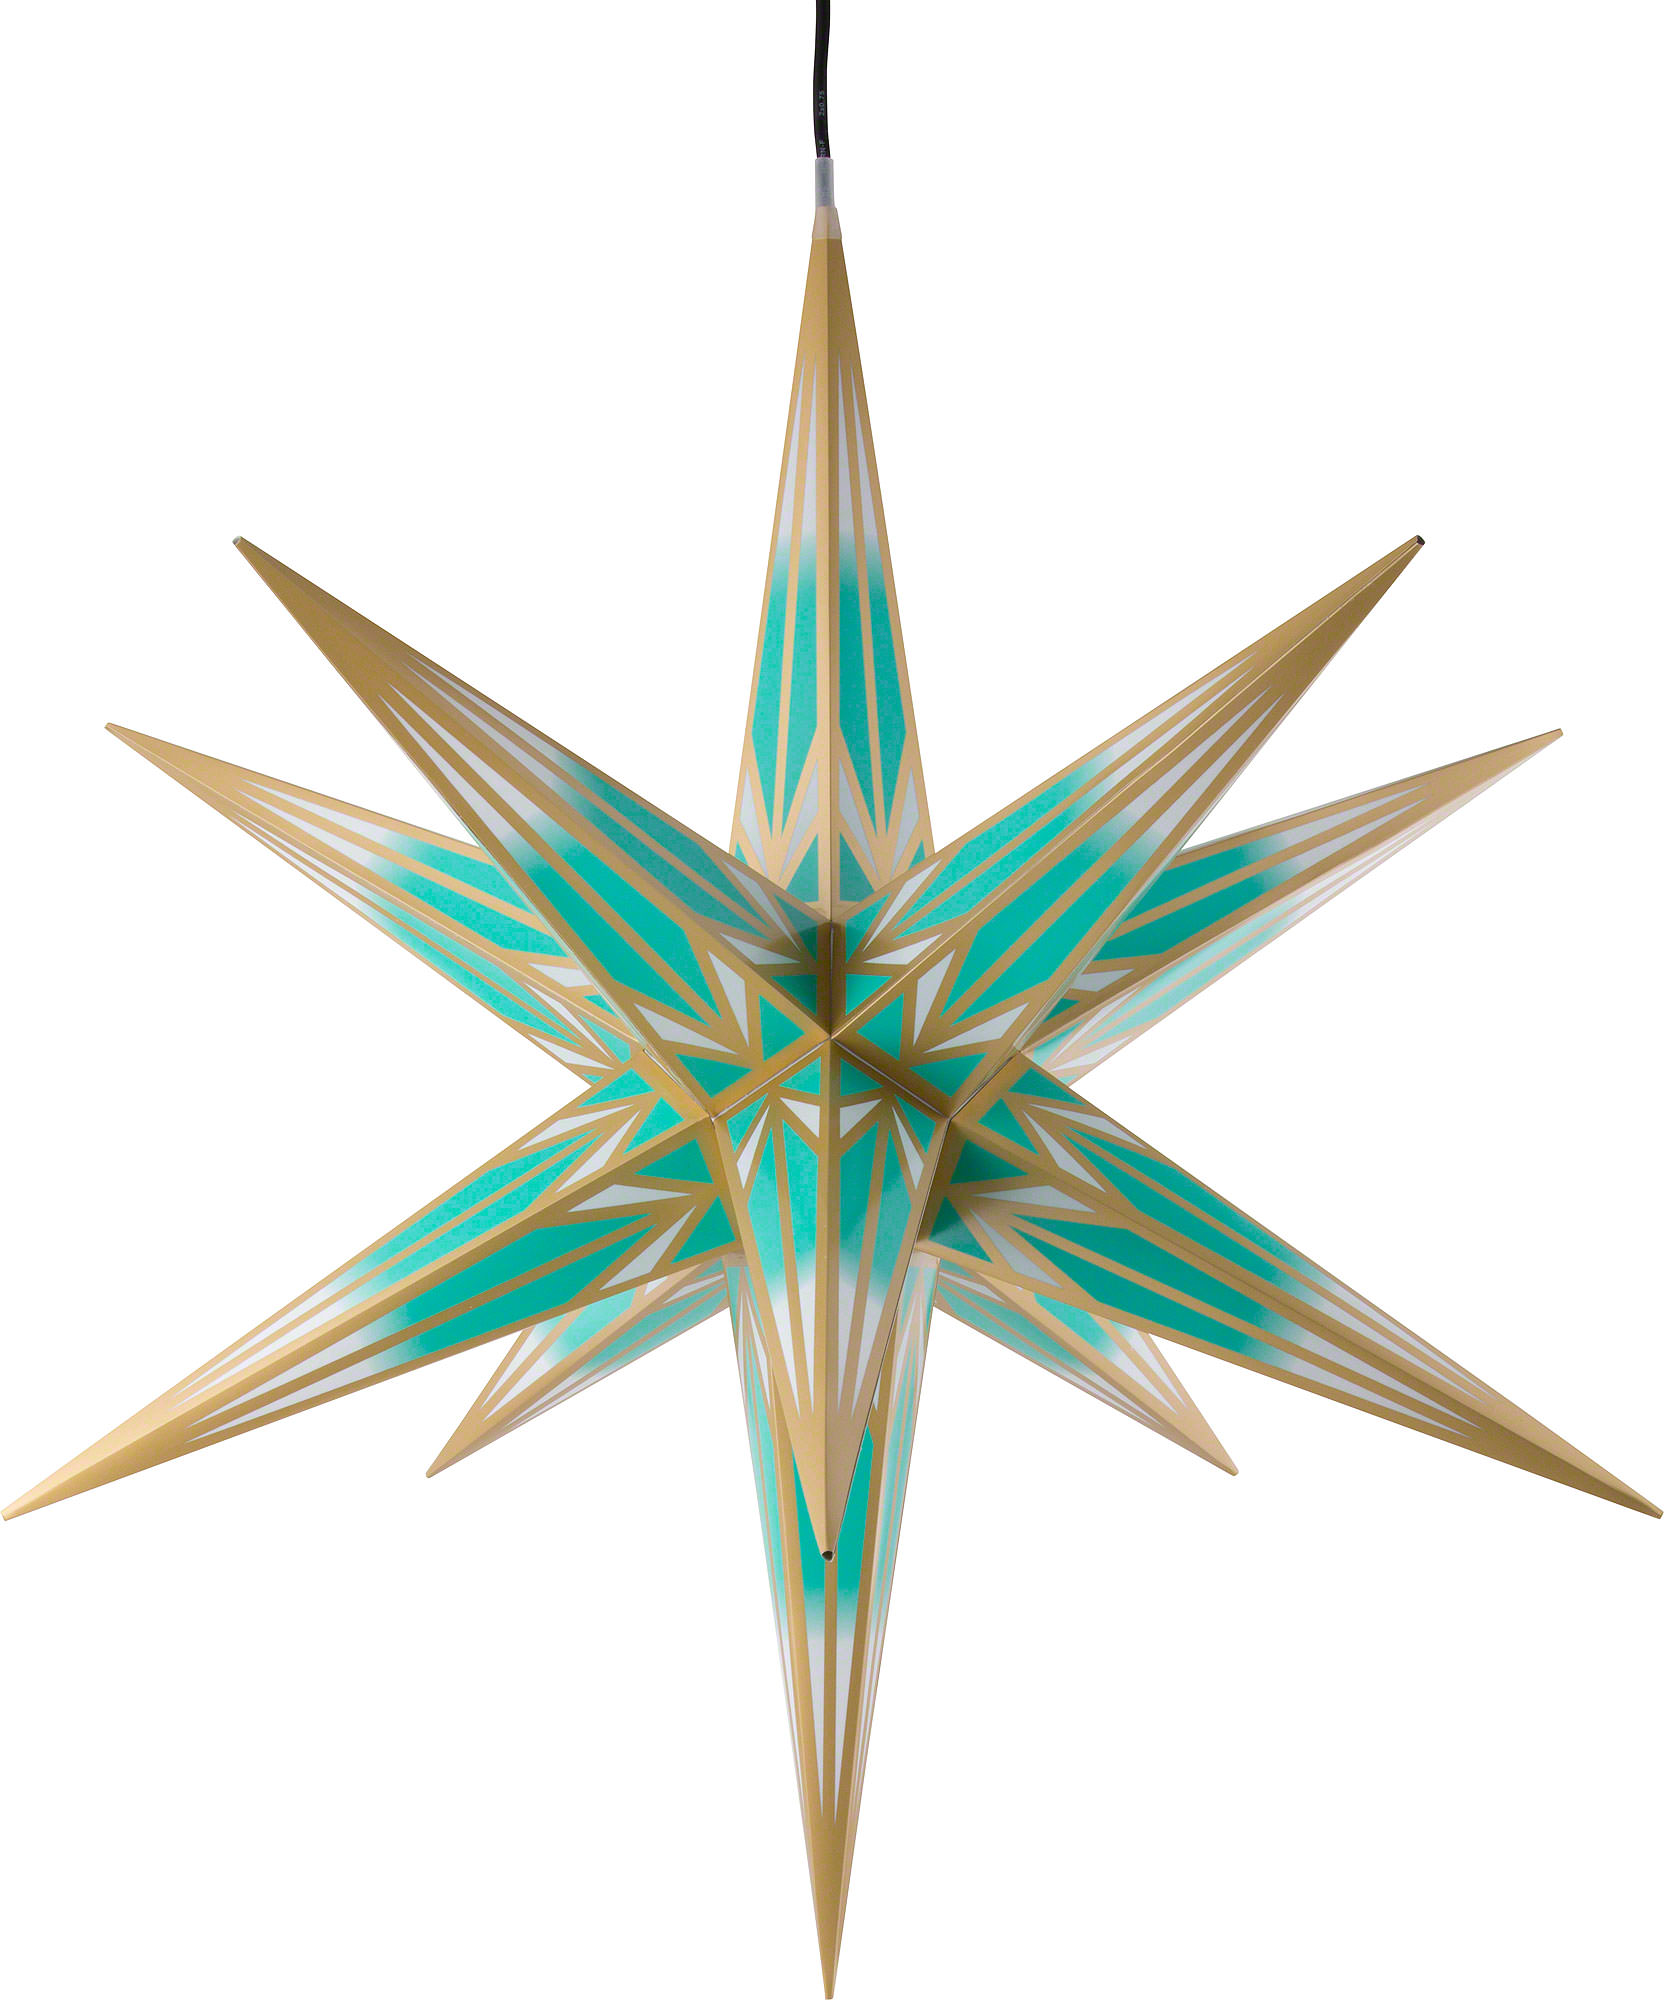 Hasslau Christmas Star for Inside and Outside Use Turquoise/White ...